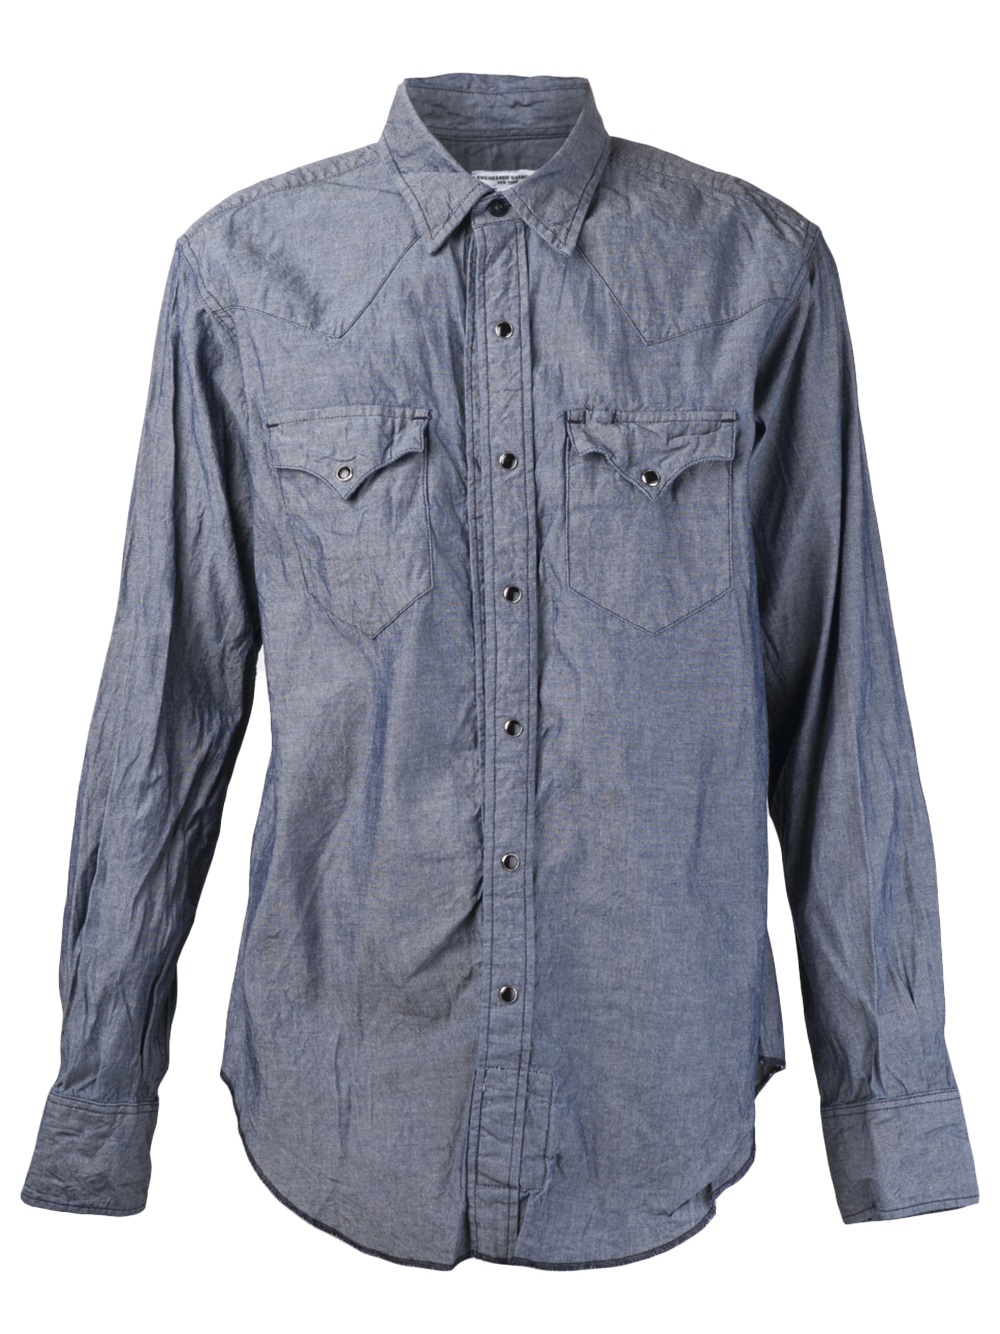 Engineered Garments Western Chambray Shirt in Blue for Men - Lyst